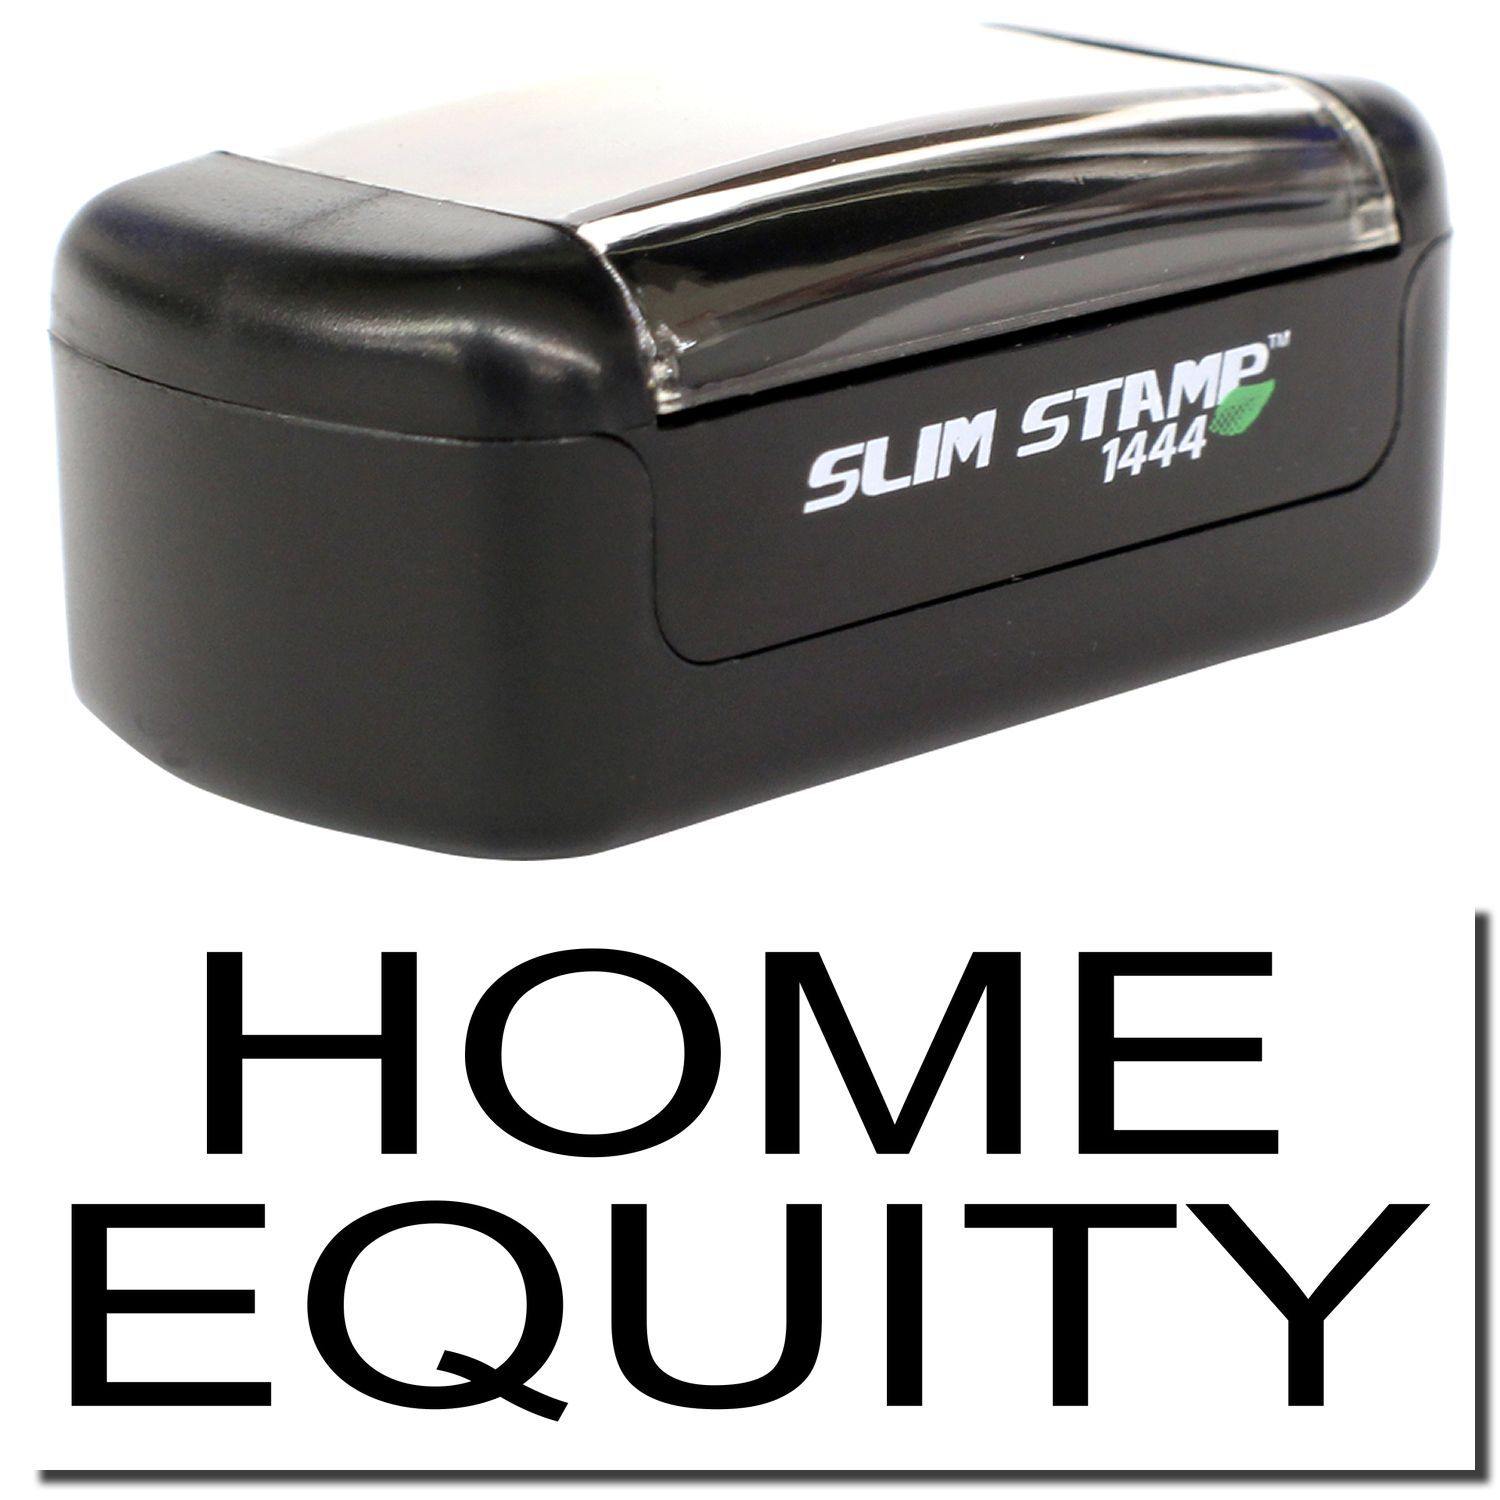 A stock office pre-inked stamp with a stamped image showing how the text "HOME EQUITY" is displayed after stamping.